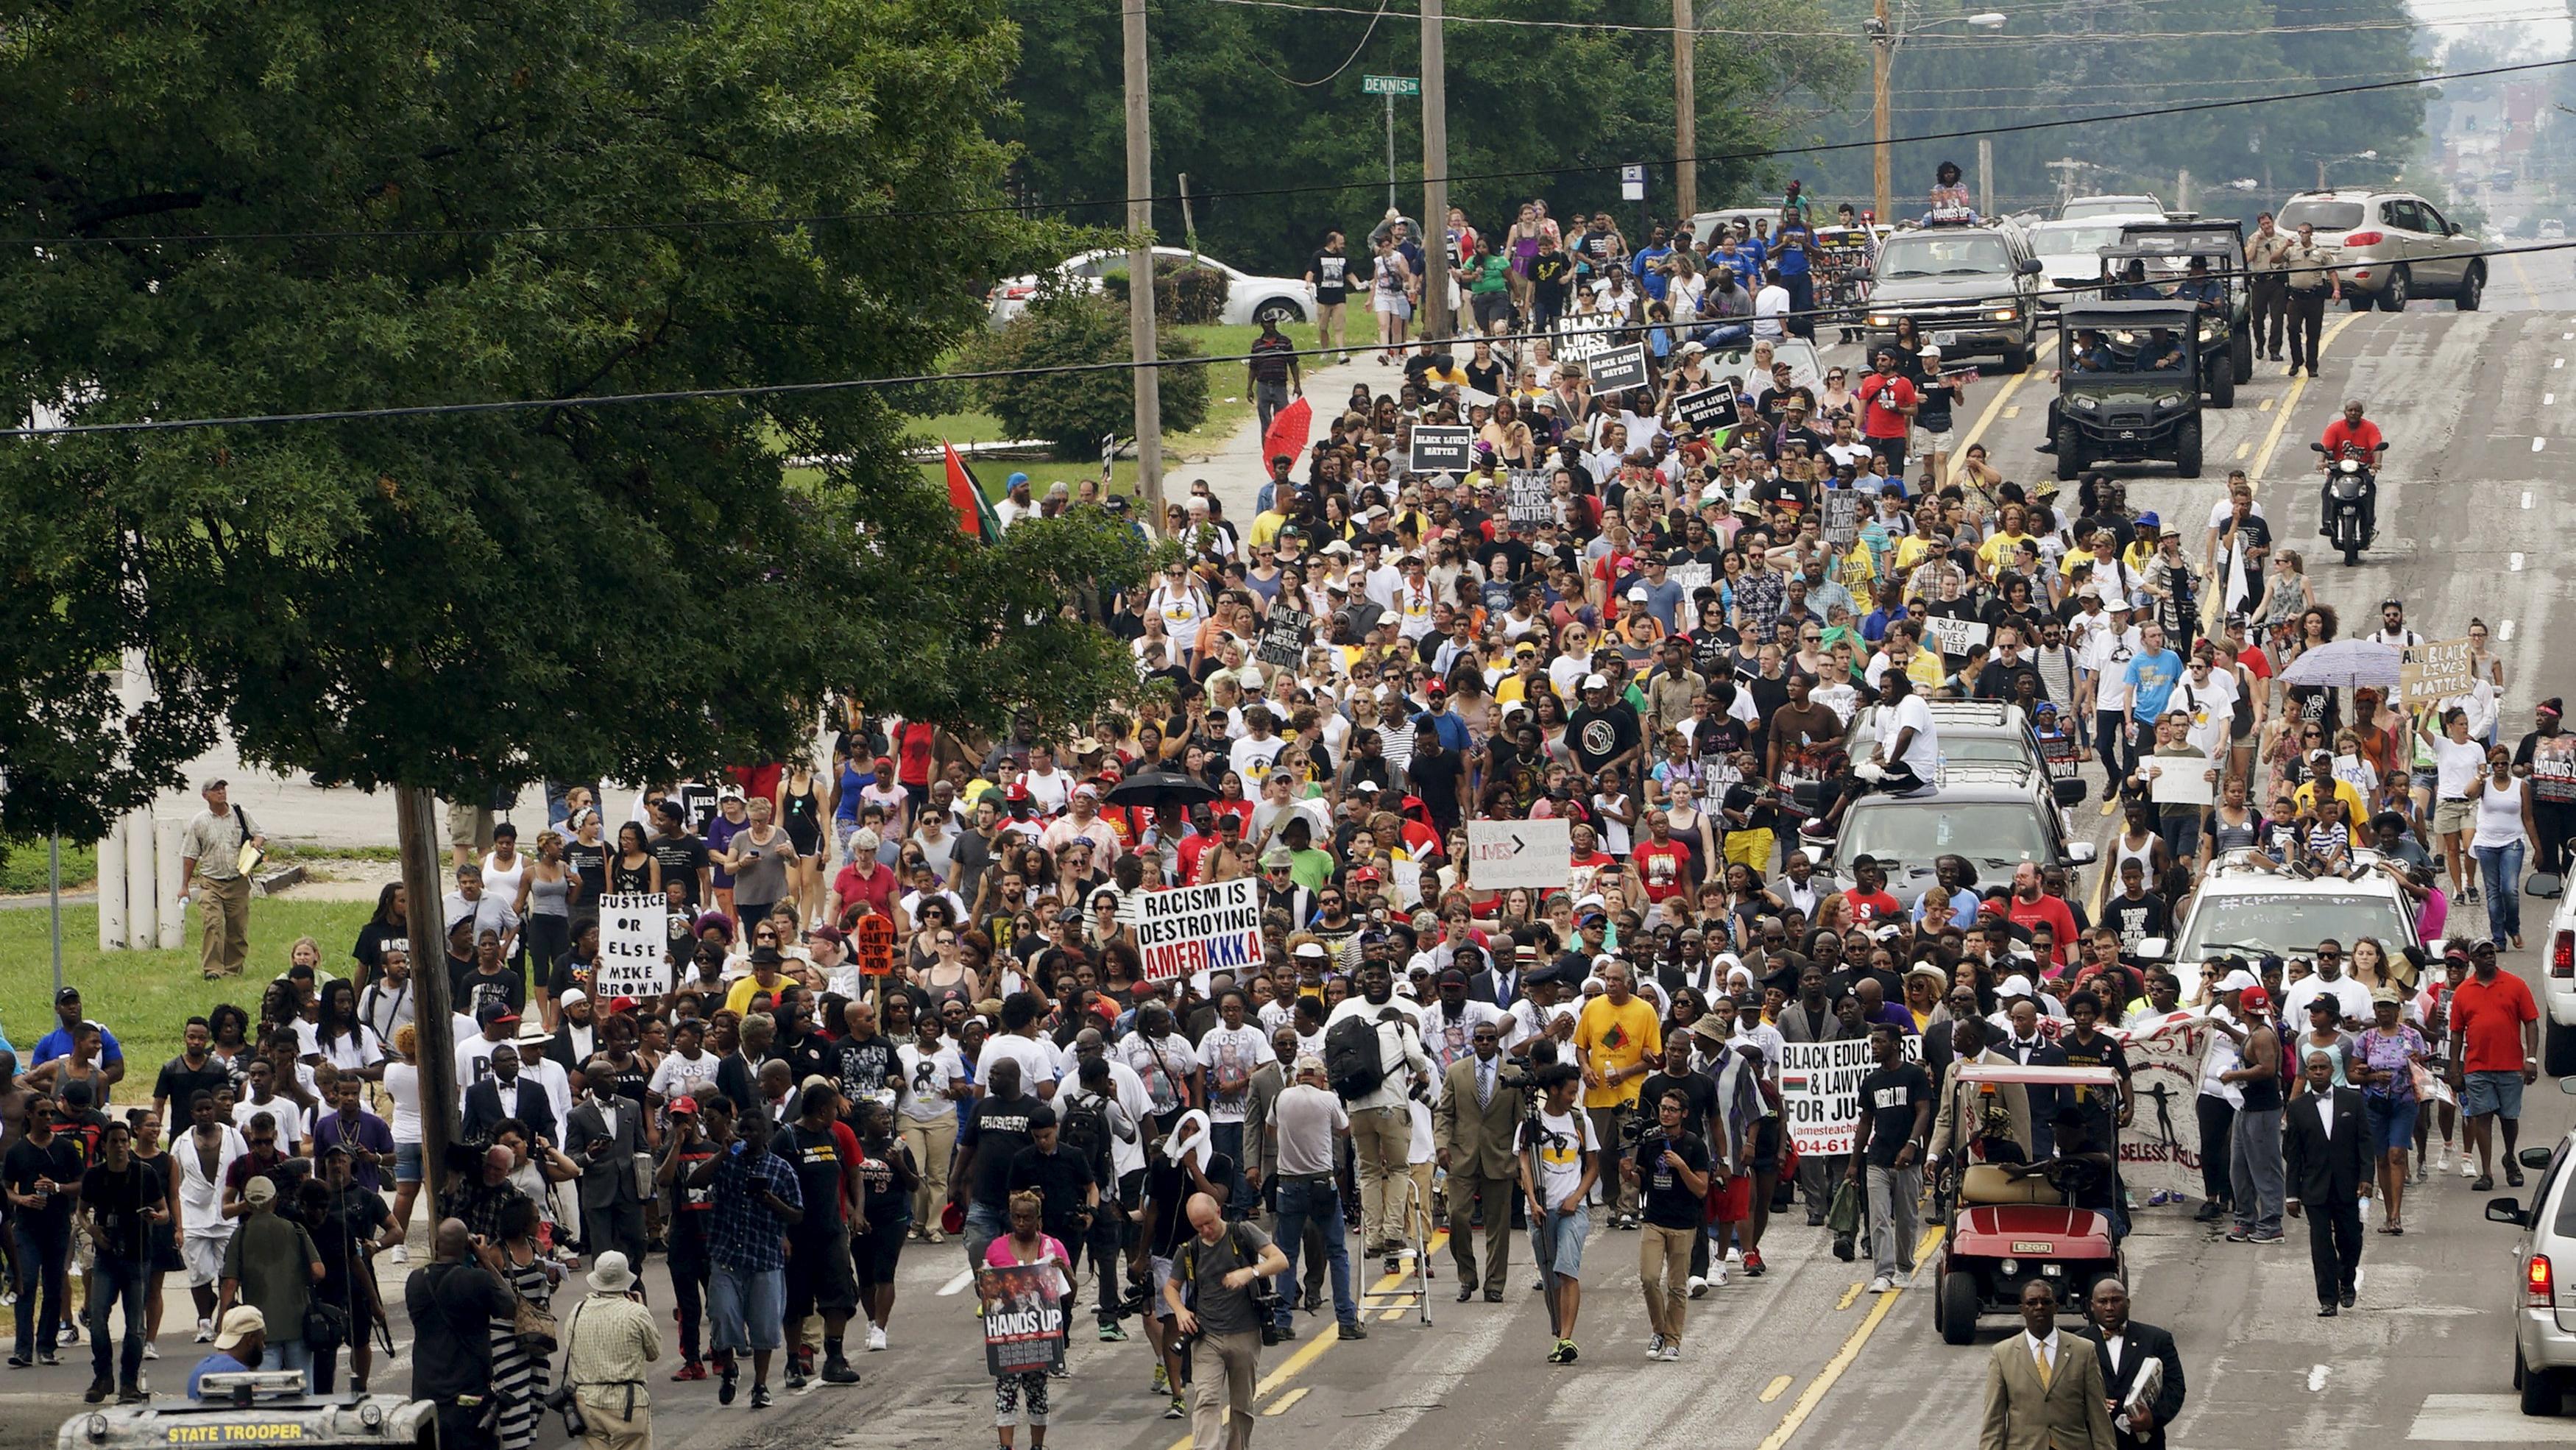 A protest, led by Michael Brown Sr., marks the one year anniversary of the killing of Michael Brown Jr. in Ferguson, Missouri.